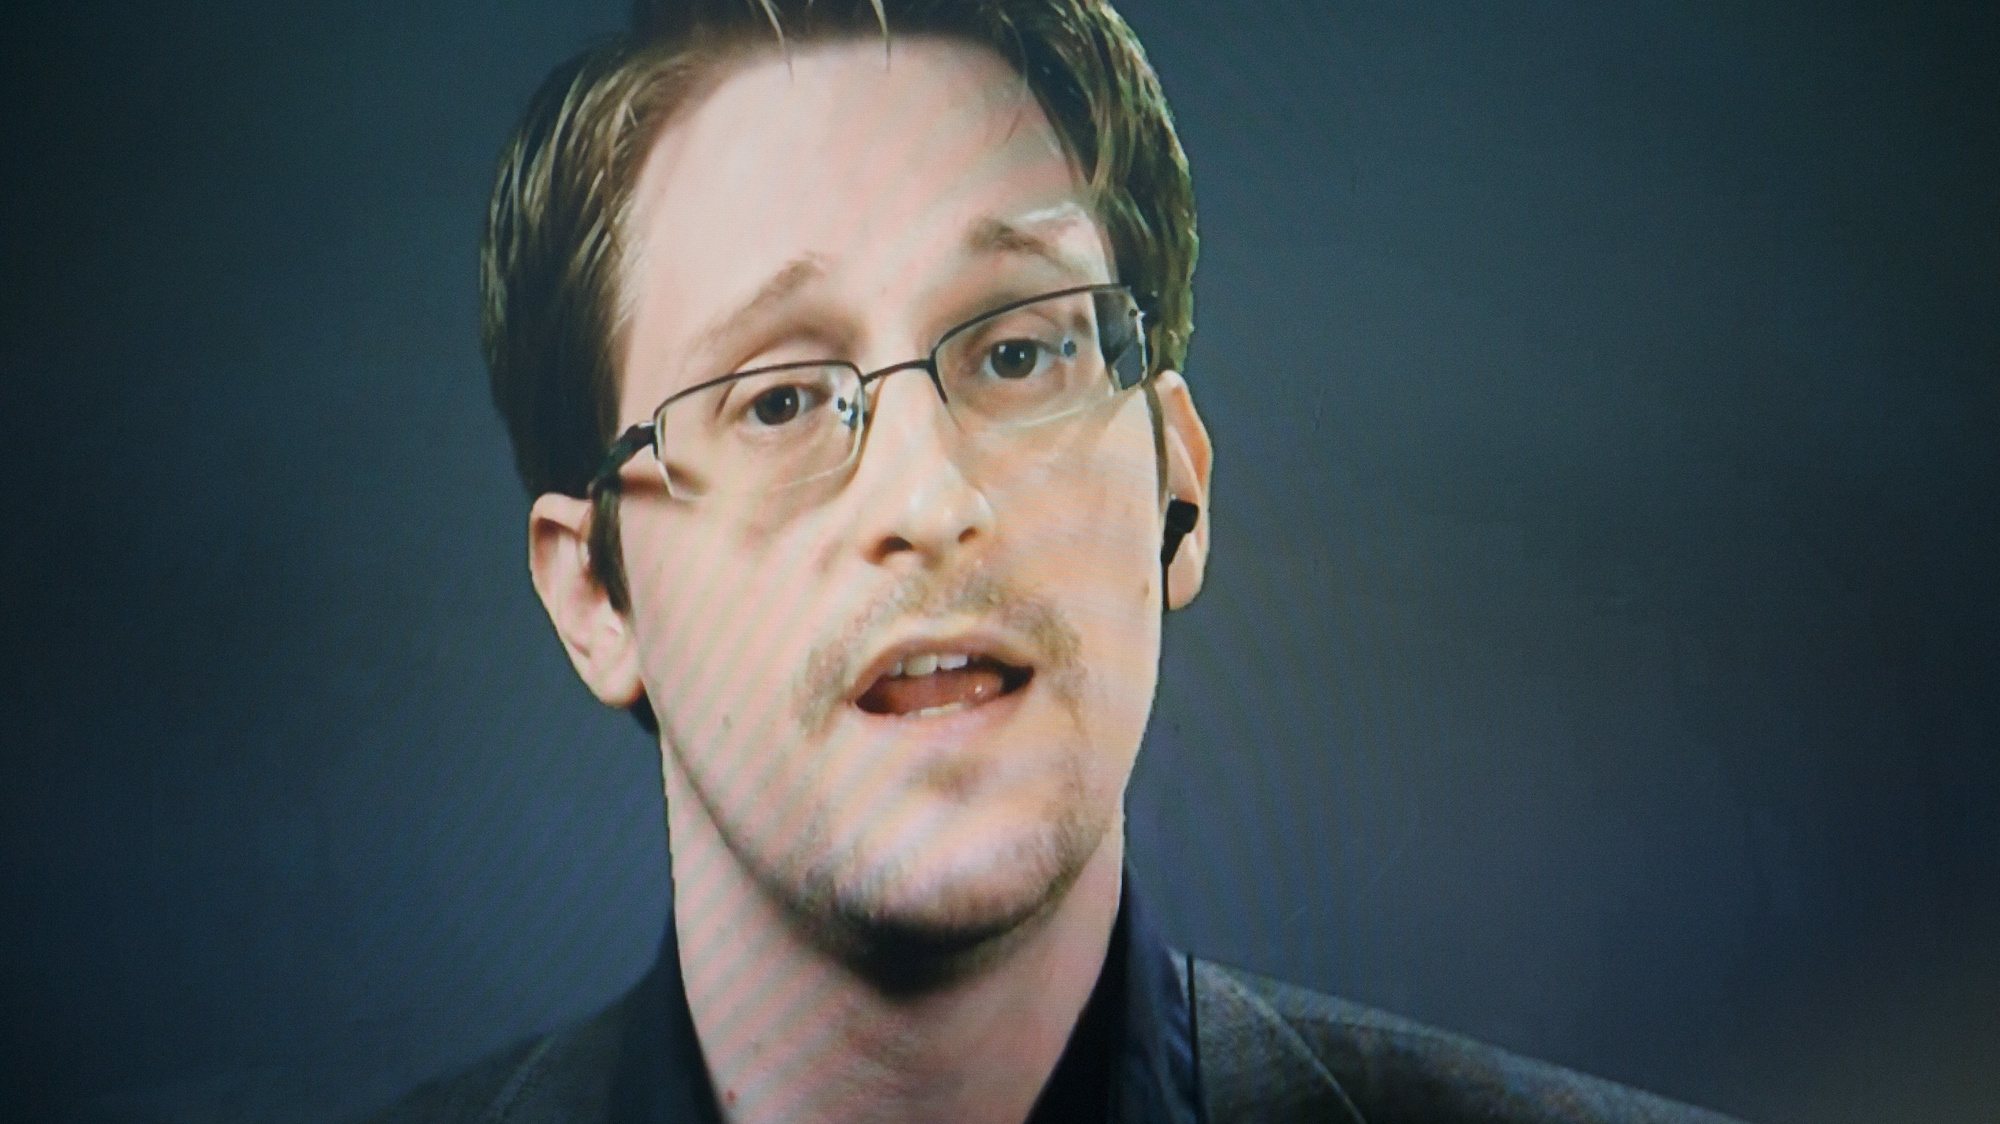 epa08792820 (FILE) - Edward Snowden, seen on a screen via satellite from Moscow, Russia, speaks during a press conference about a new campaign to persuade US President Barack Obama to pardon him for violating the United States&#039; Espionage Act in 2013 by leaking classified documents in New York, New York, USA, 14 September 2016 (reissued 02 November 2020). Snowden on 02 November 2020 wrote on Twitter that he and his wife plan to apply for a dual Russian-US citizenship.  EPA/JUSTIN LANE *** Local Caption *** 53017456